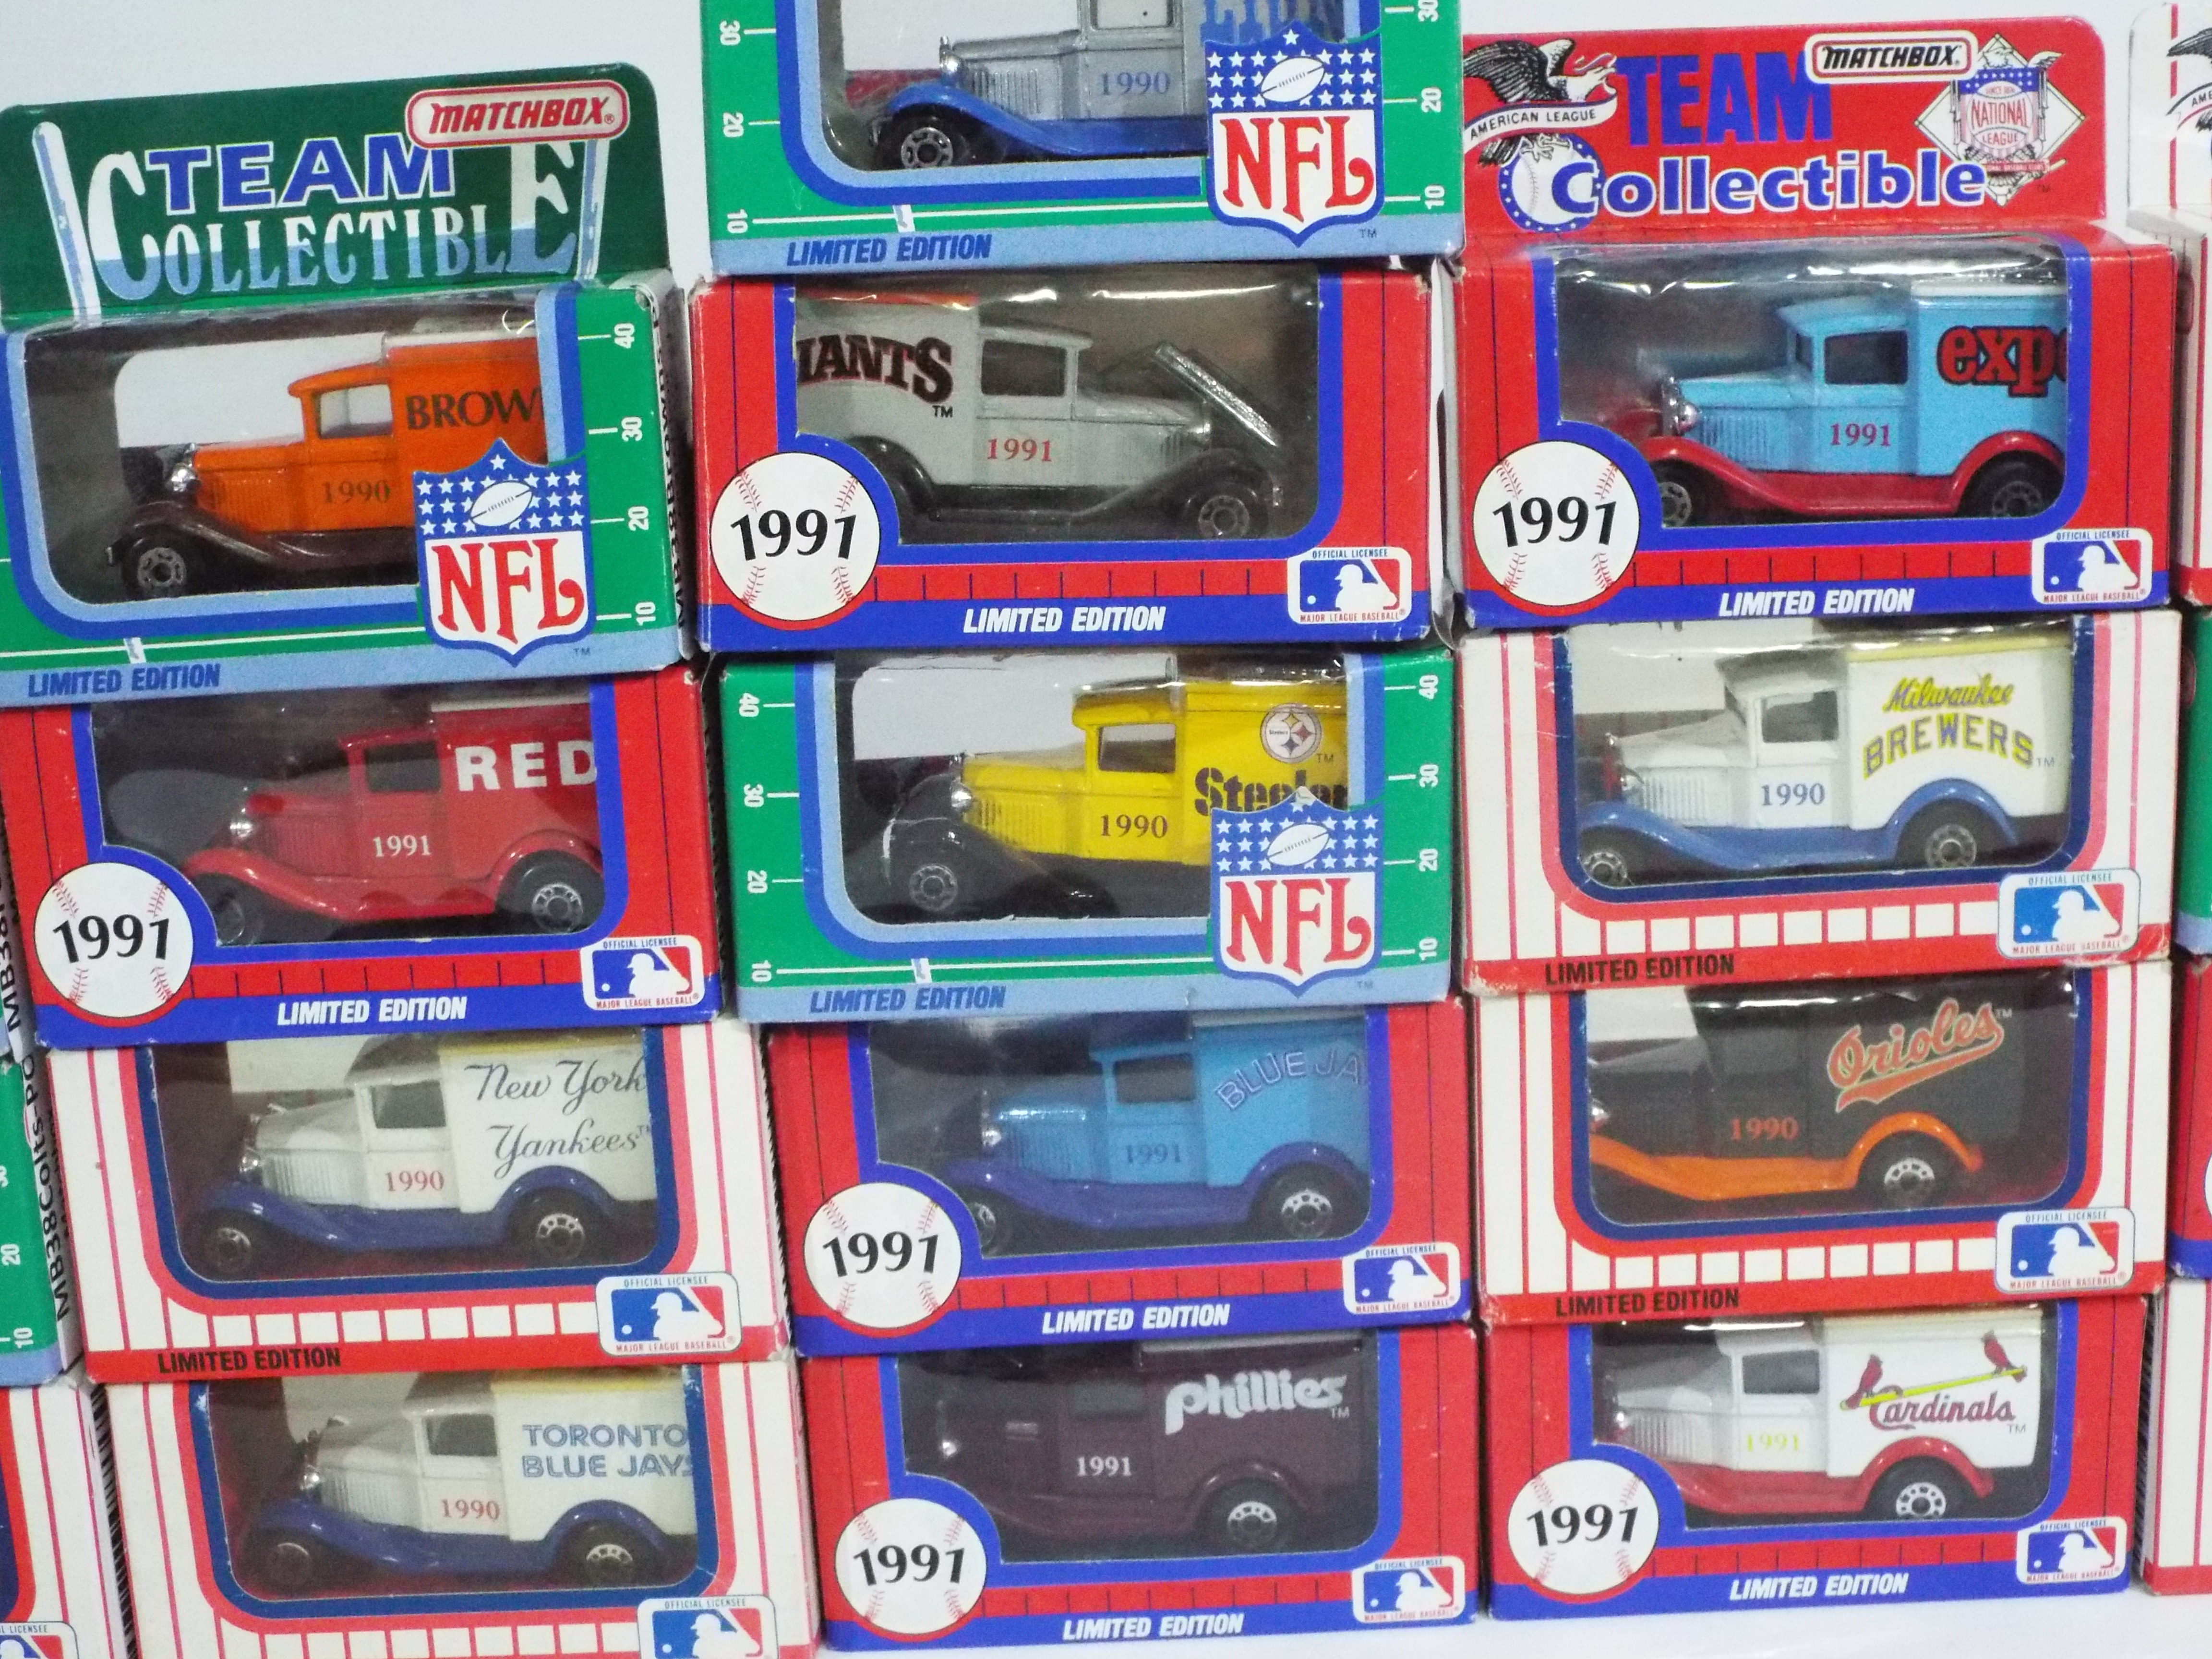 Matchbox - 21 x limited edition boxed Team Collectible 'Major League Baseball' and 'NFL' Matchbox - Image 2 of 2